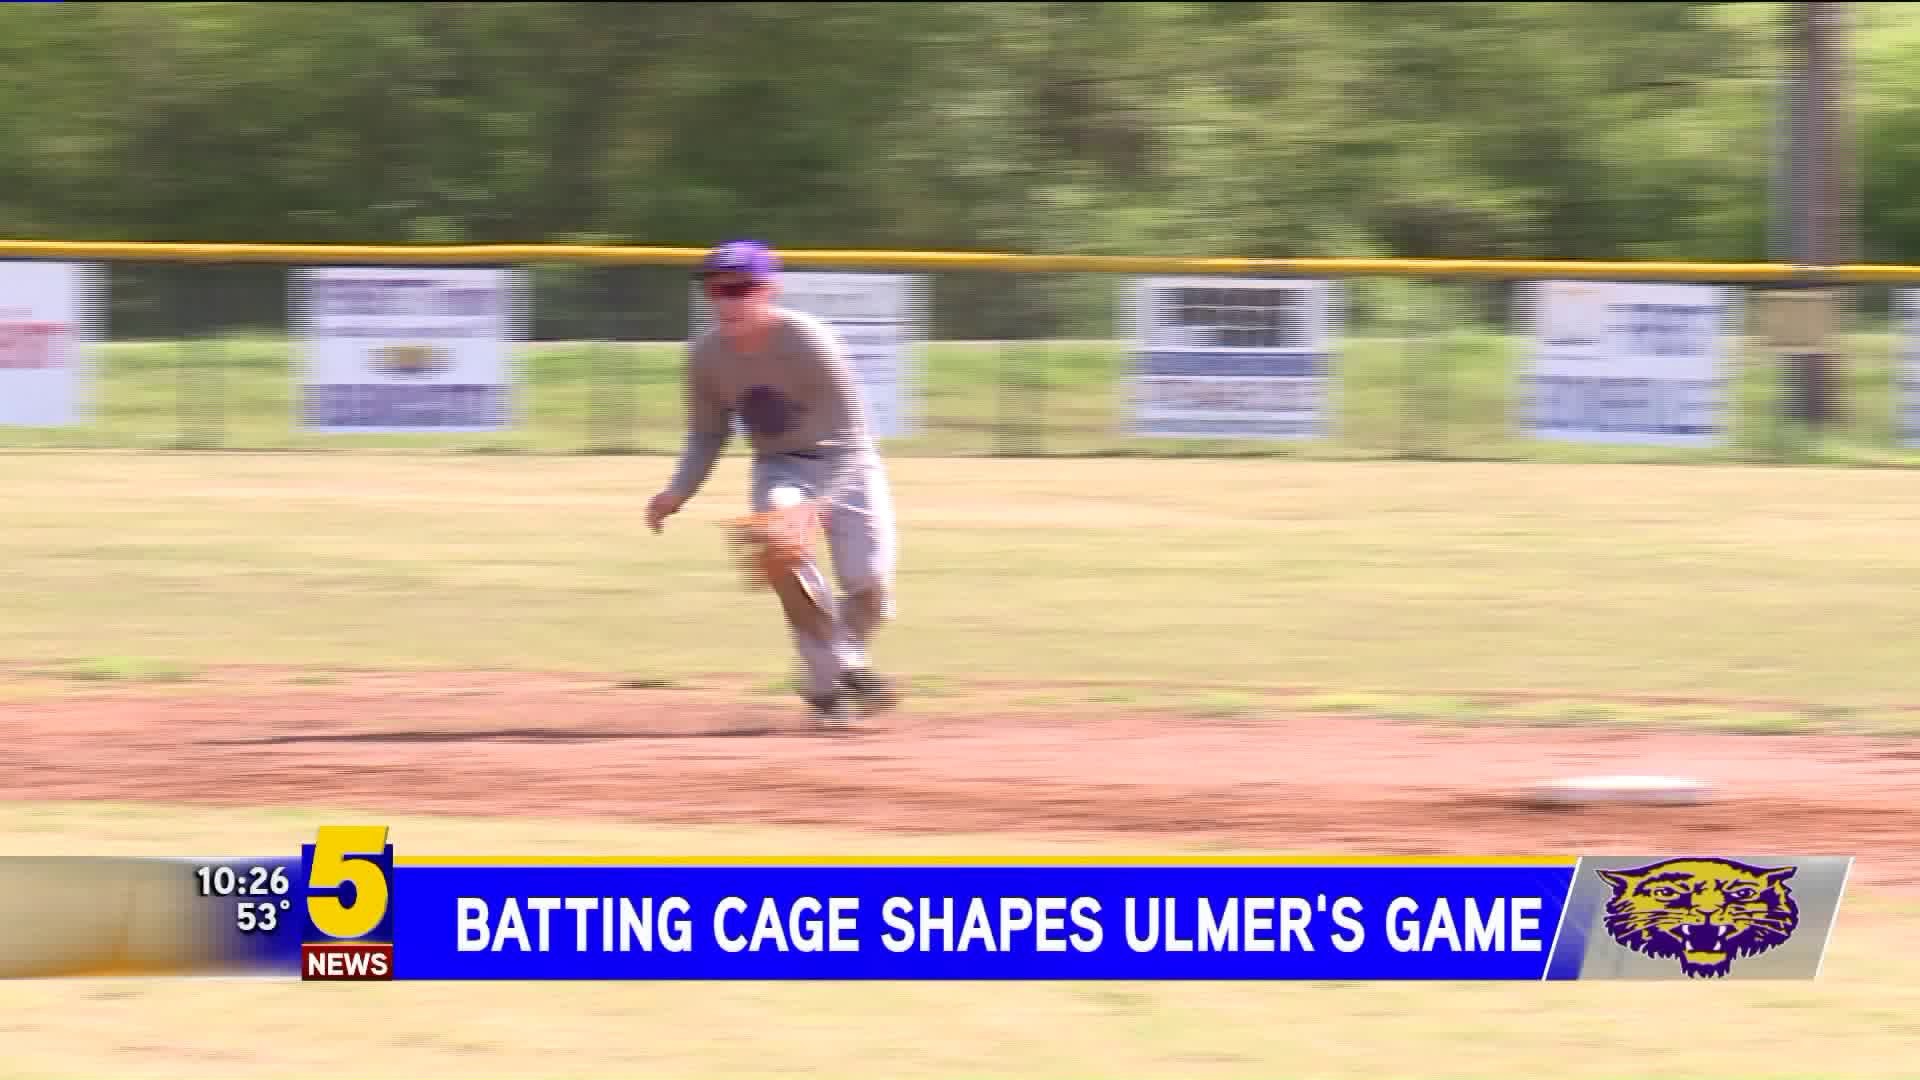 Ulmer Leading Bearcats Thanks To Love Of Batting Cage